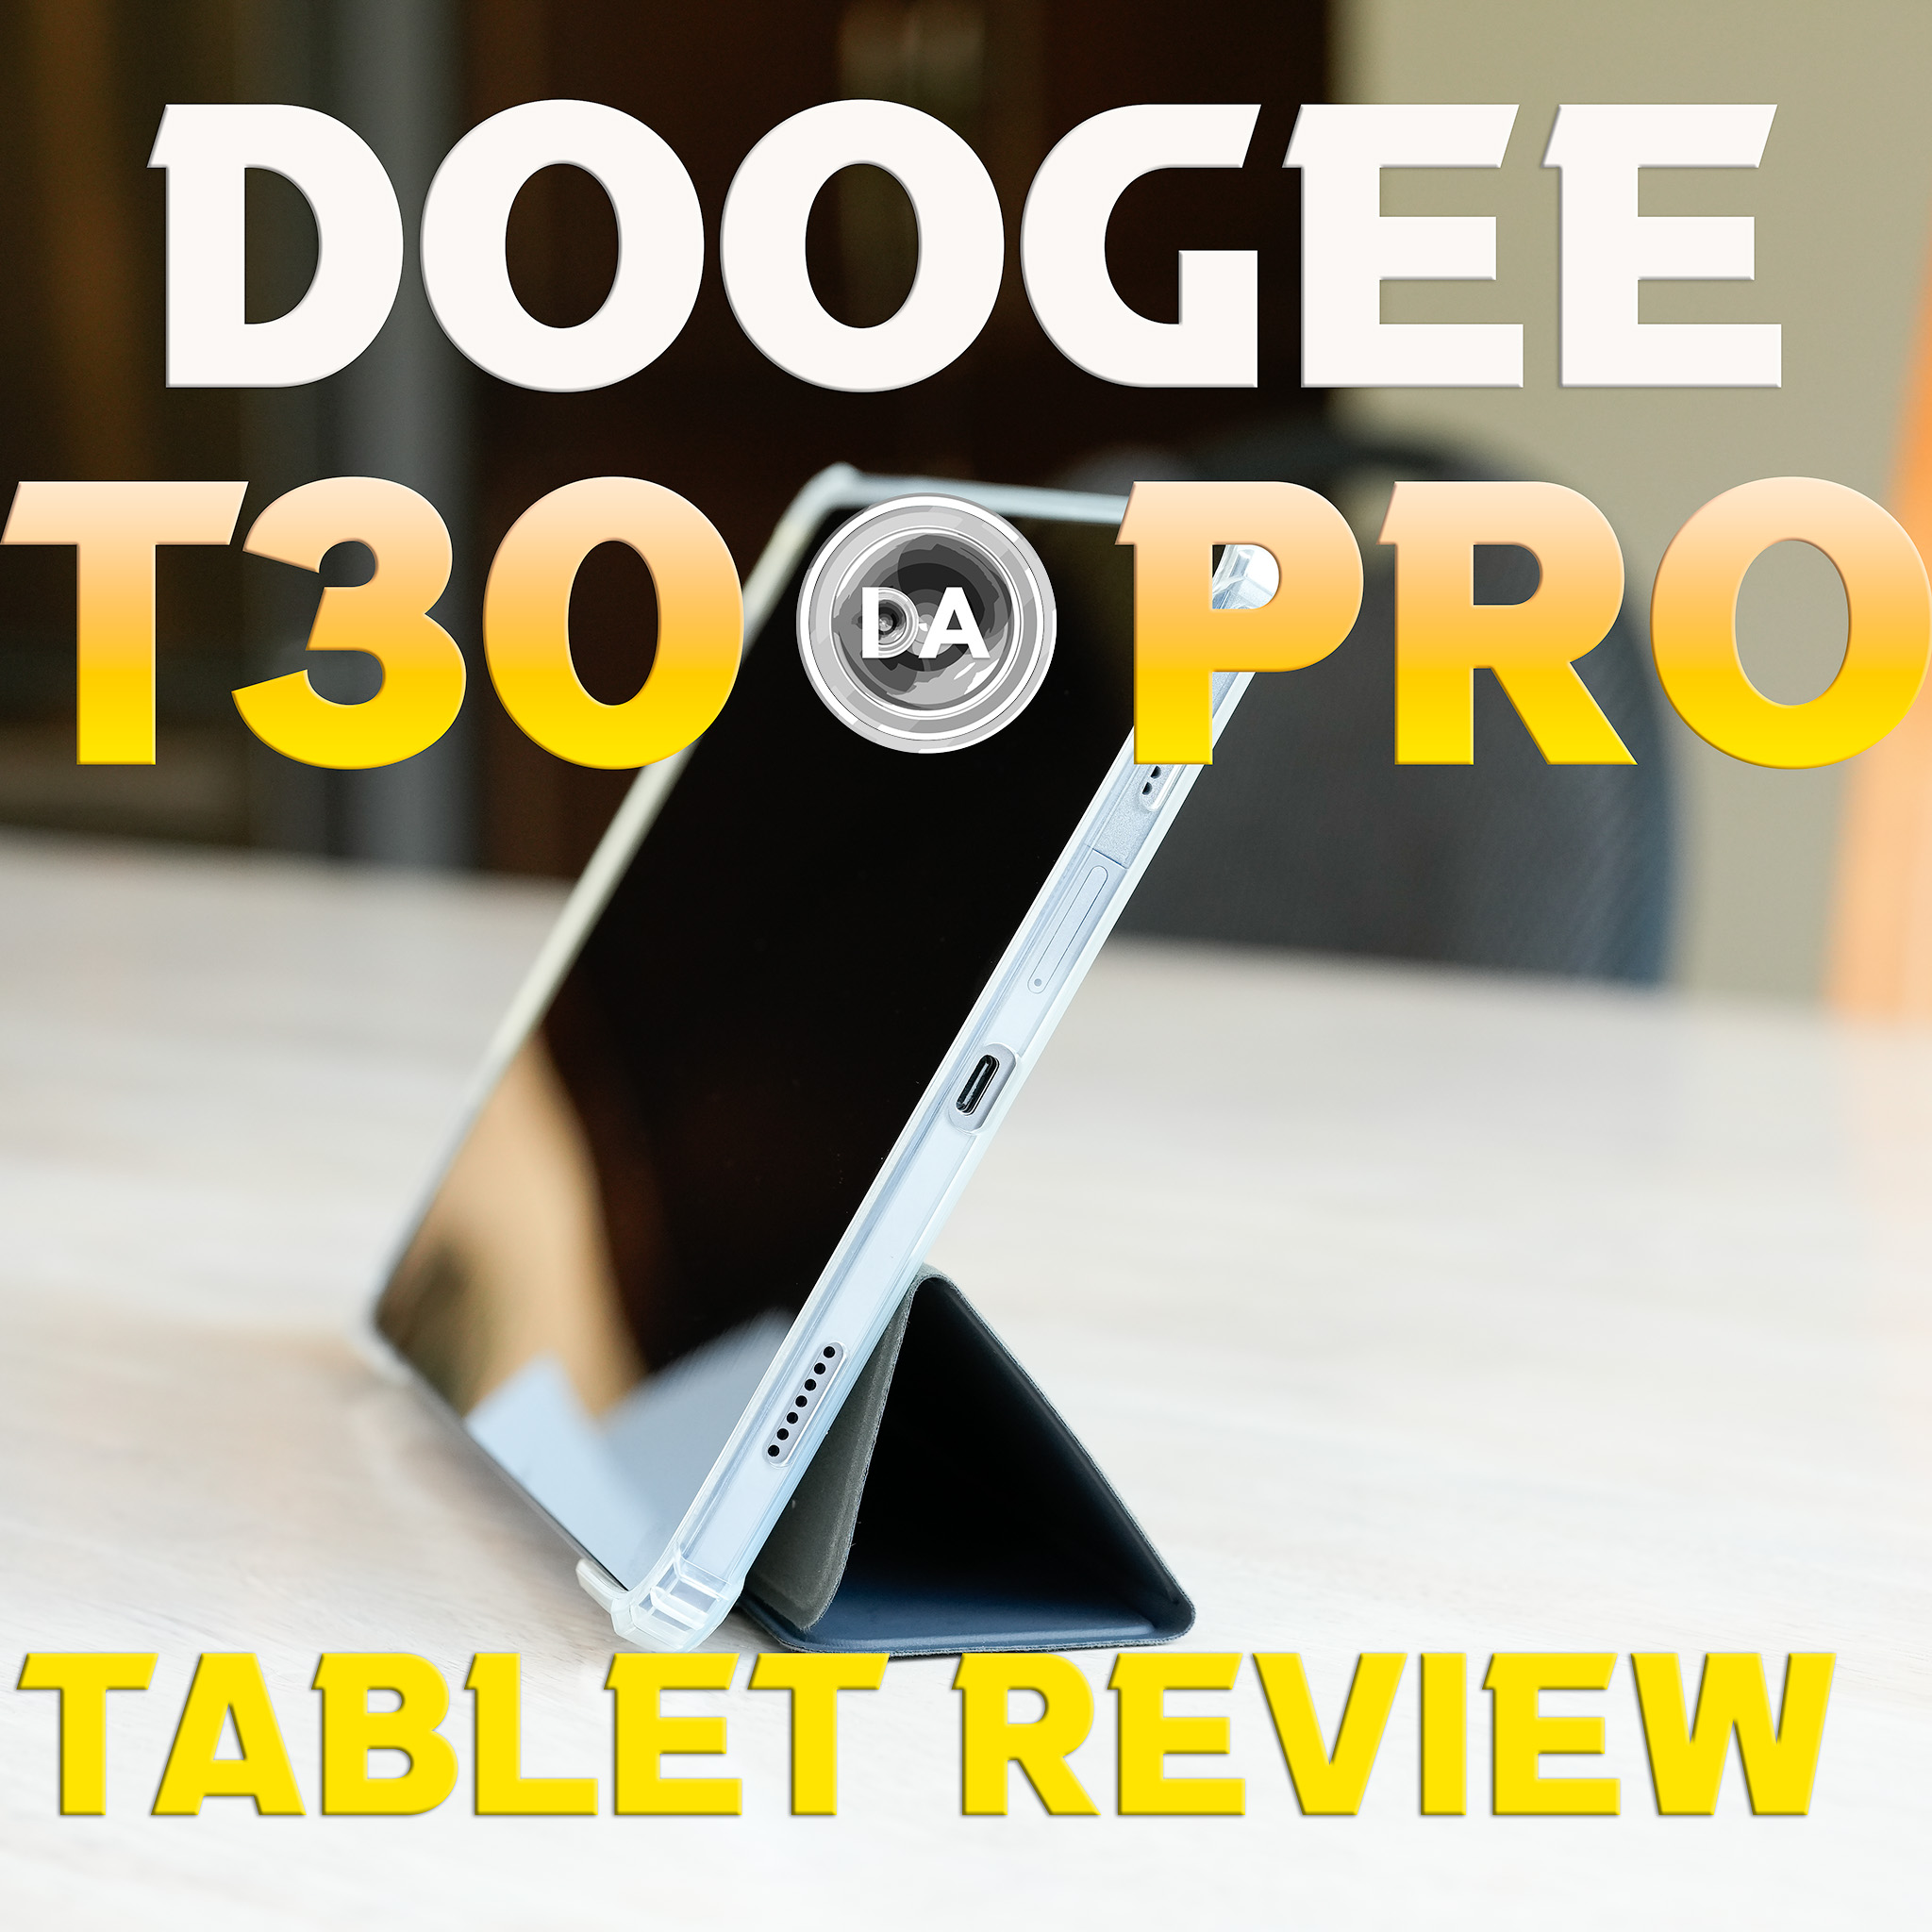  DOOGEE T30 PRO Tablet,11'' 2.5K Android 13 Tablets